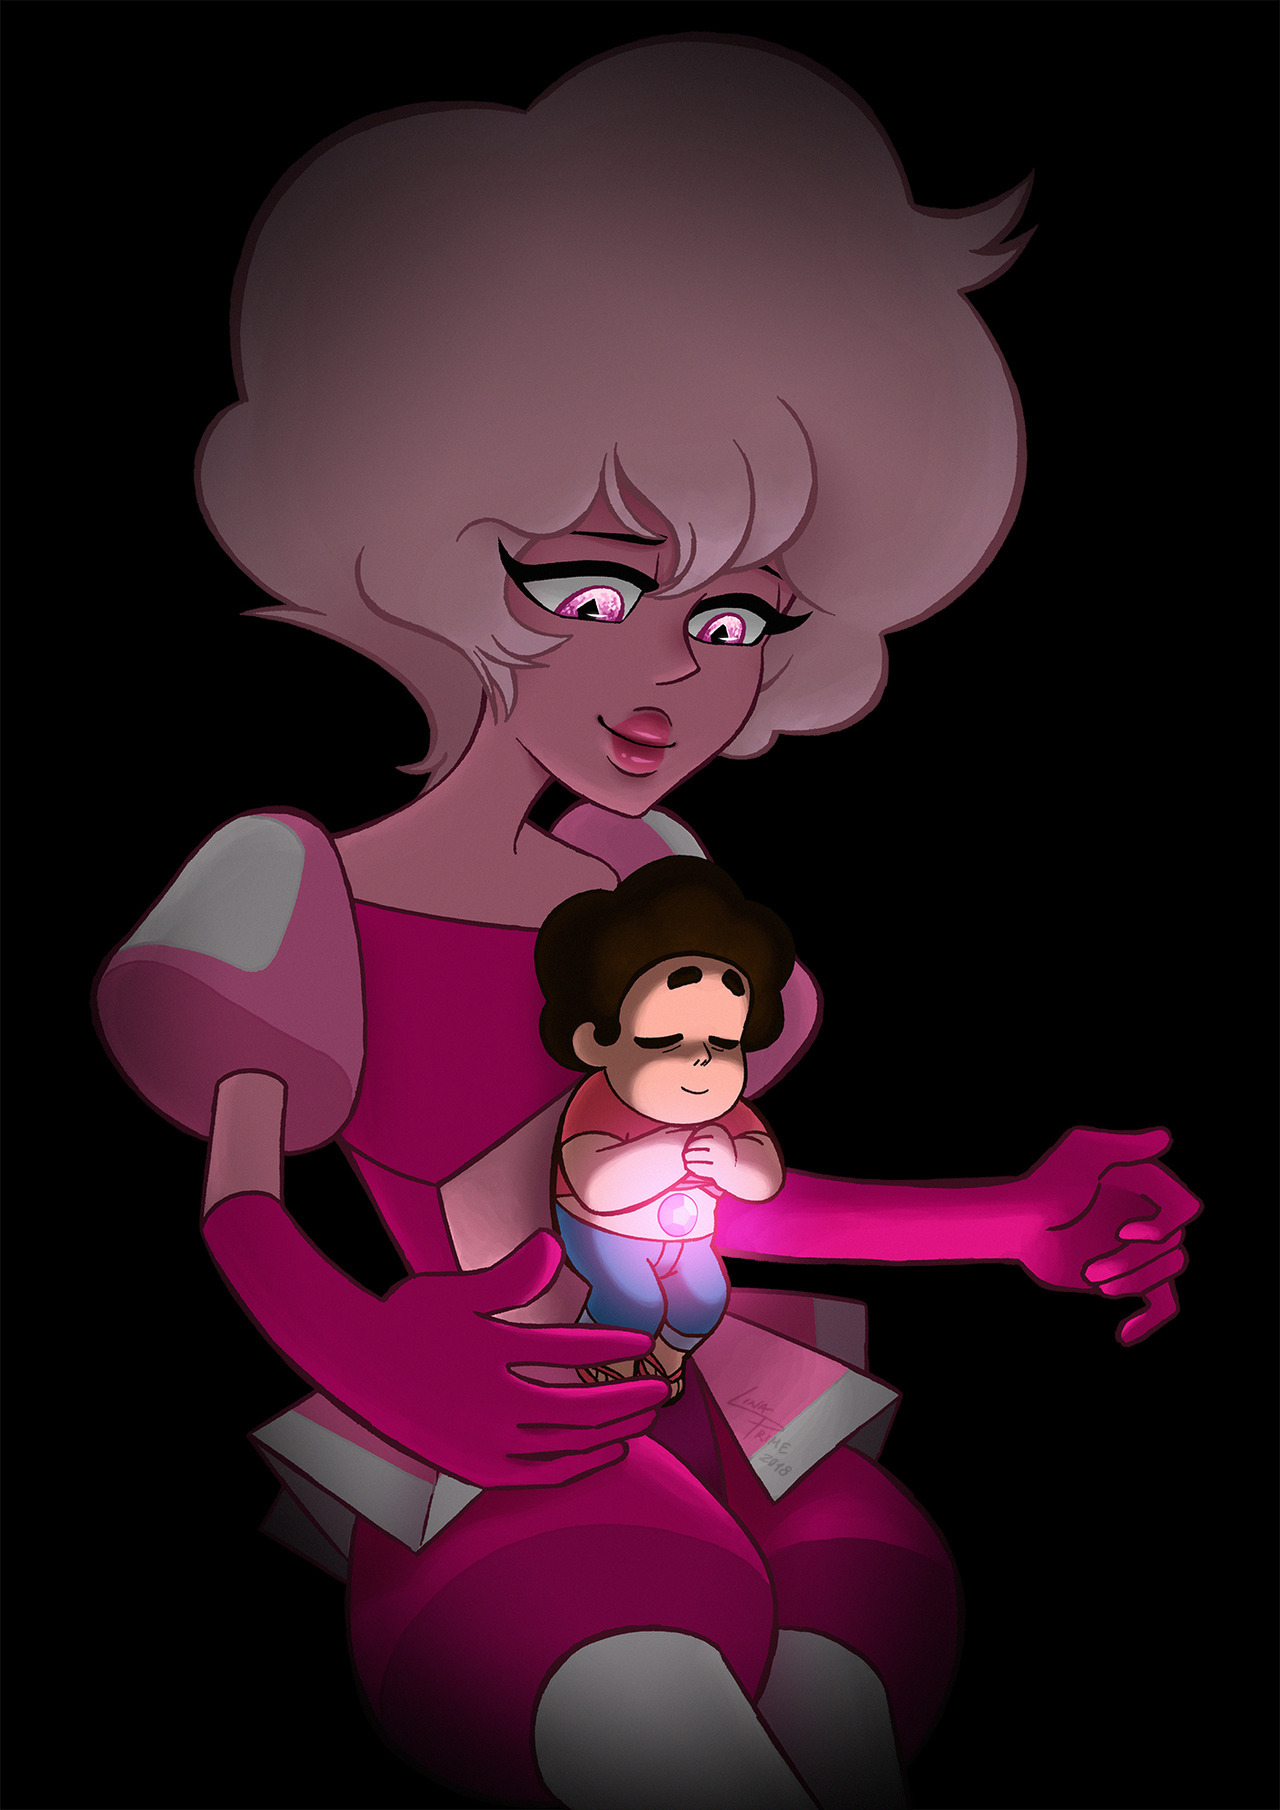 Gemglow - Steven & Pink Diamond Rose: “Isn’t it remarkable, Steven? This world is full of so many possibilities. Each living thing has an entirely unique experience. The sights they see, the sounds...